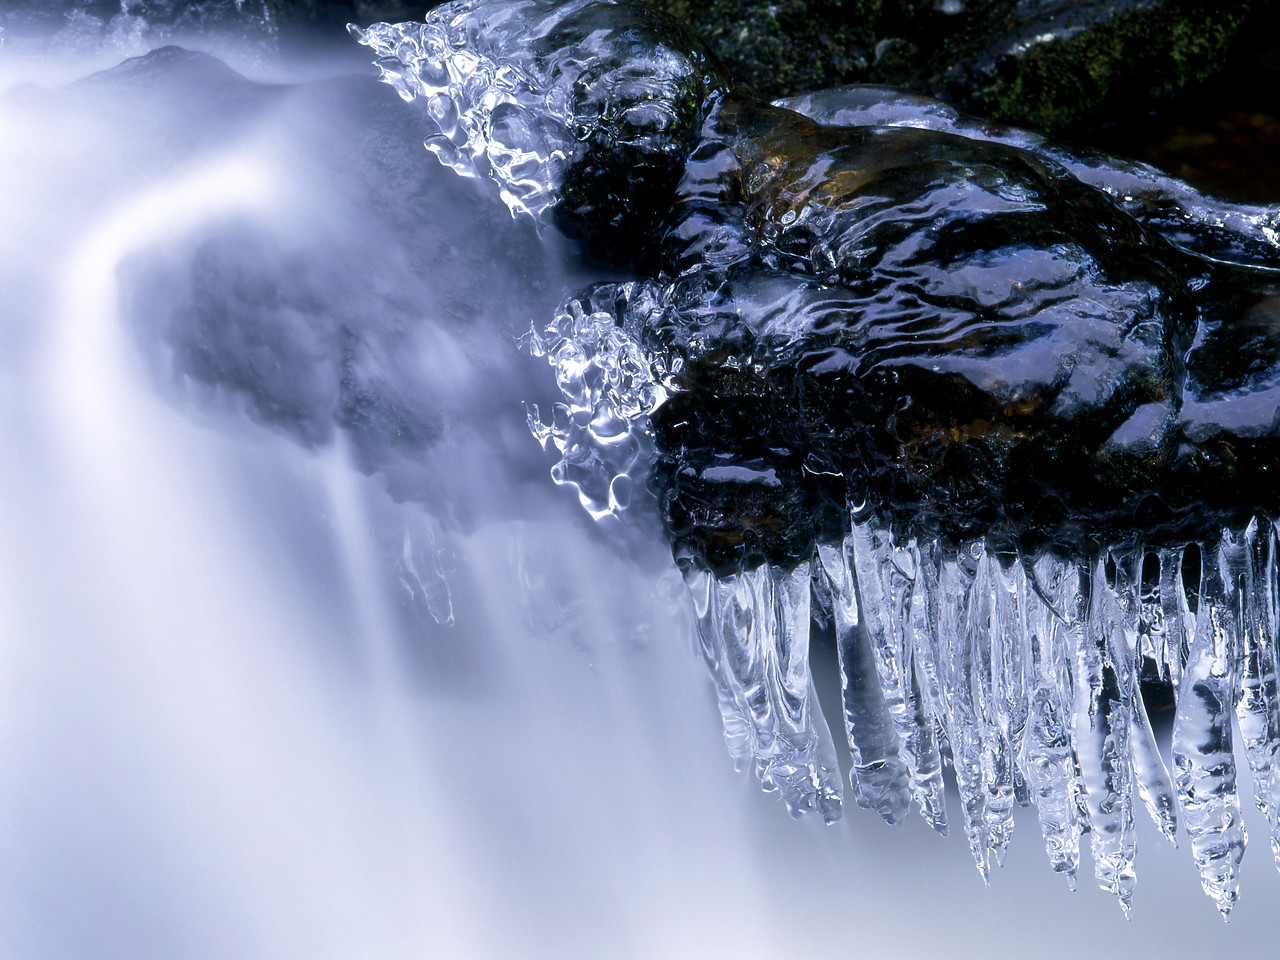 #030011-1 - Icicles & Waterfall, Lake District National Park, Cumbria, England